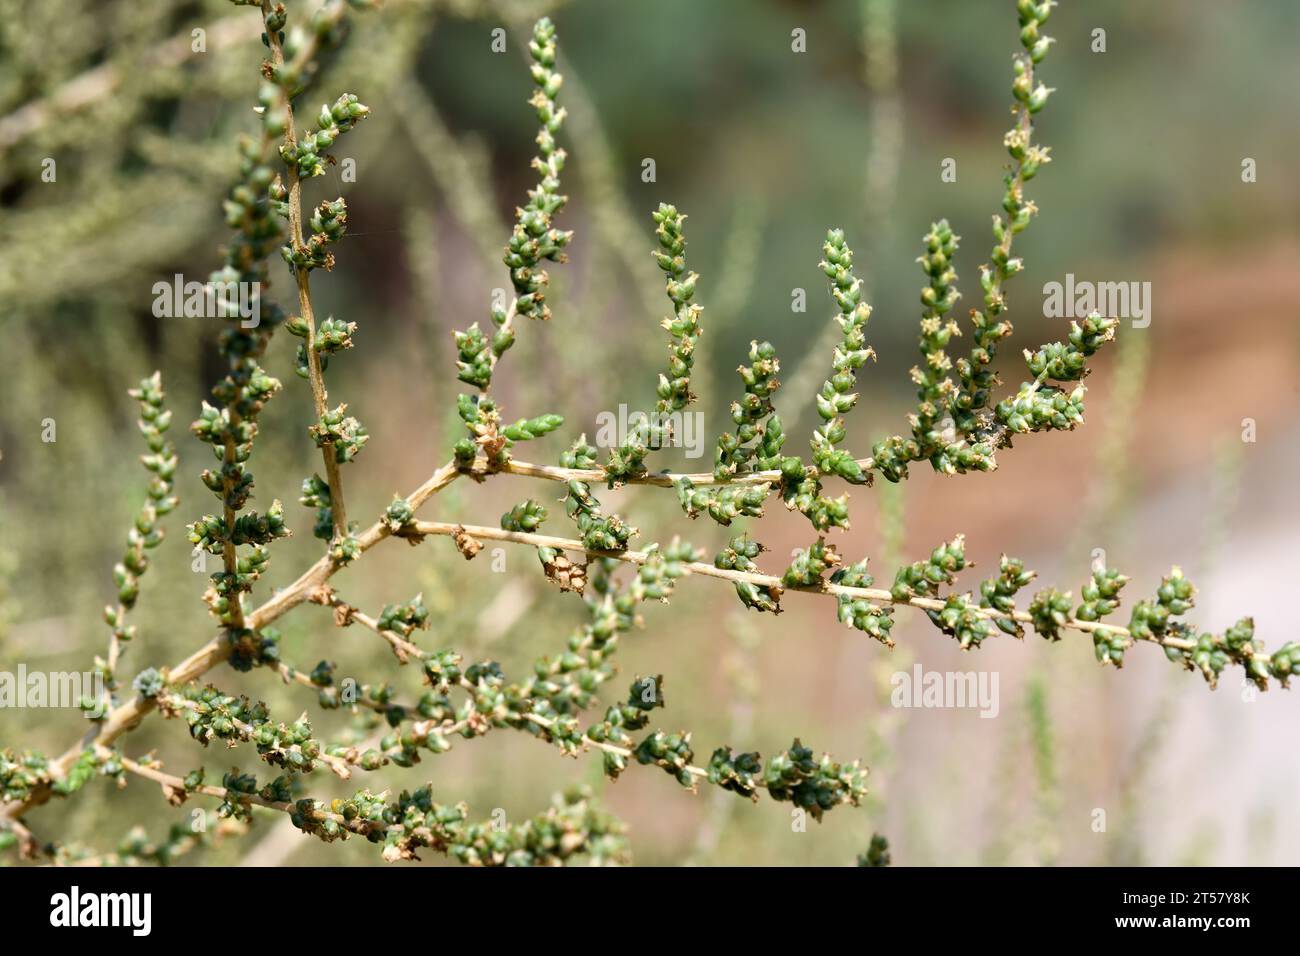 Mediterranean saltwort (Salsola vermiculata) is a branched shrub native to Mediterranean Basin and Middle East. Fruits. Stock Photo